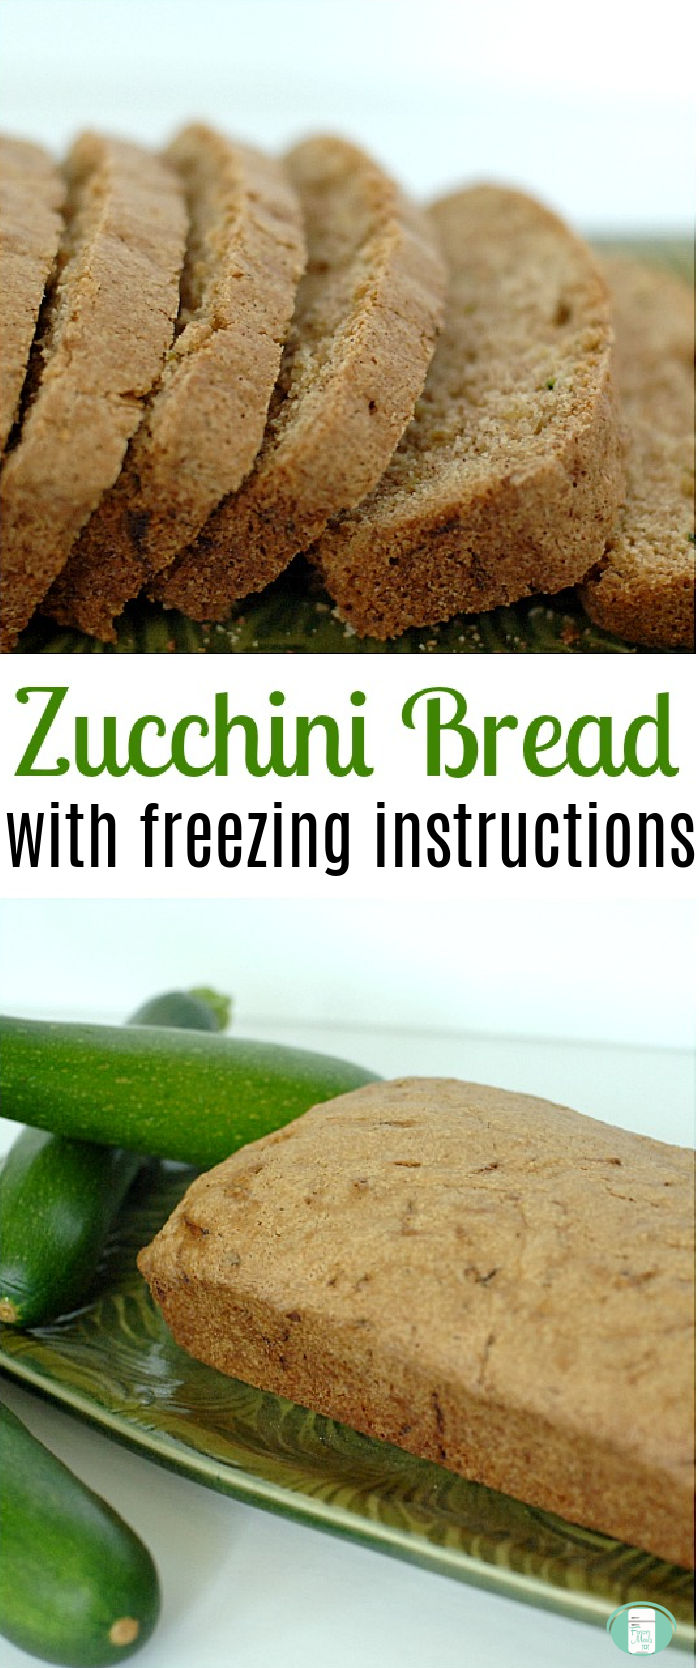 zucchini bread sliced in top image and unsliced in bottom image